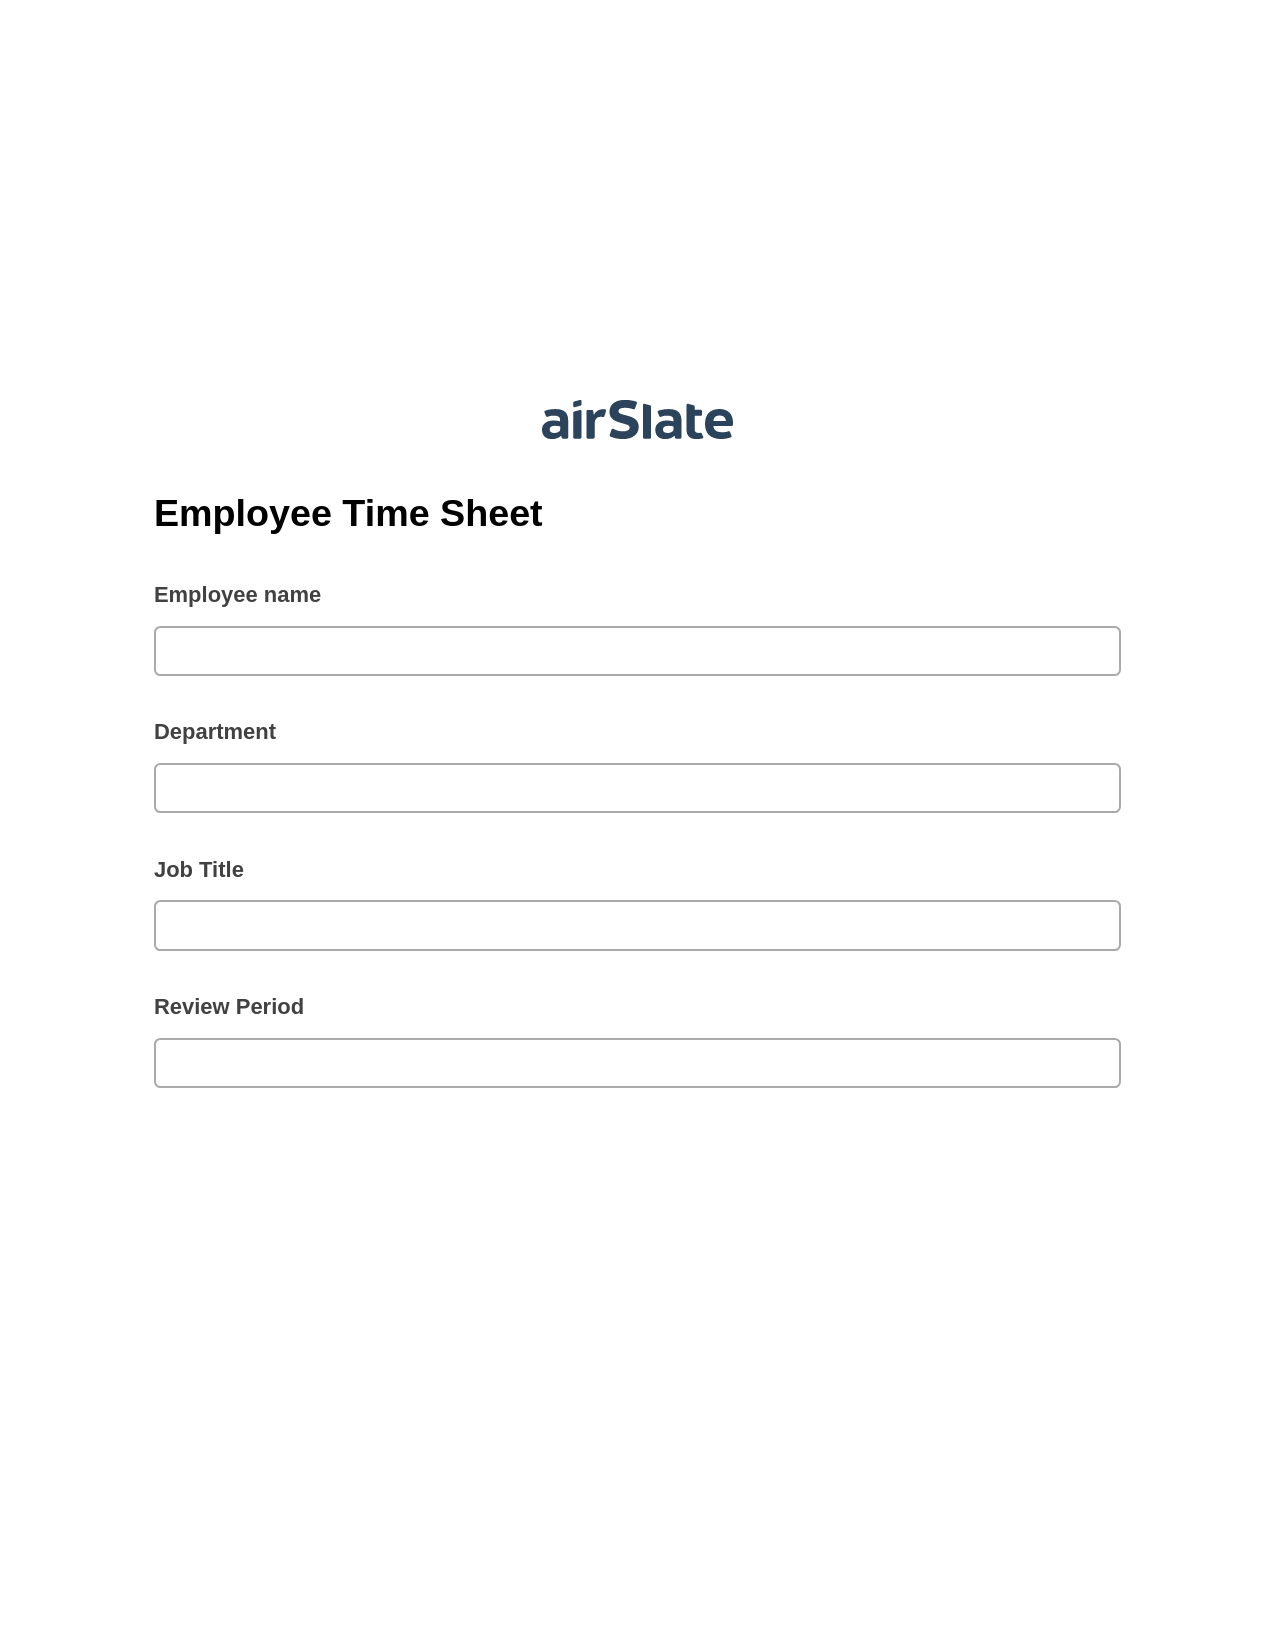 Employee Time Sheet Pre-fill Document Bot, Create Salesforce Records Bot, Post-finish Document Bot